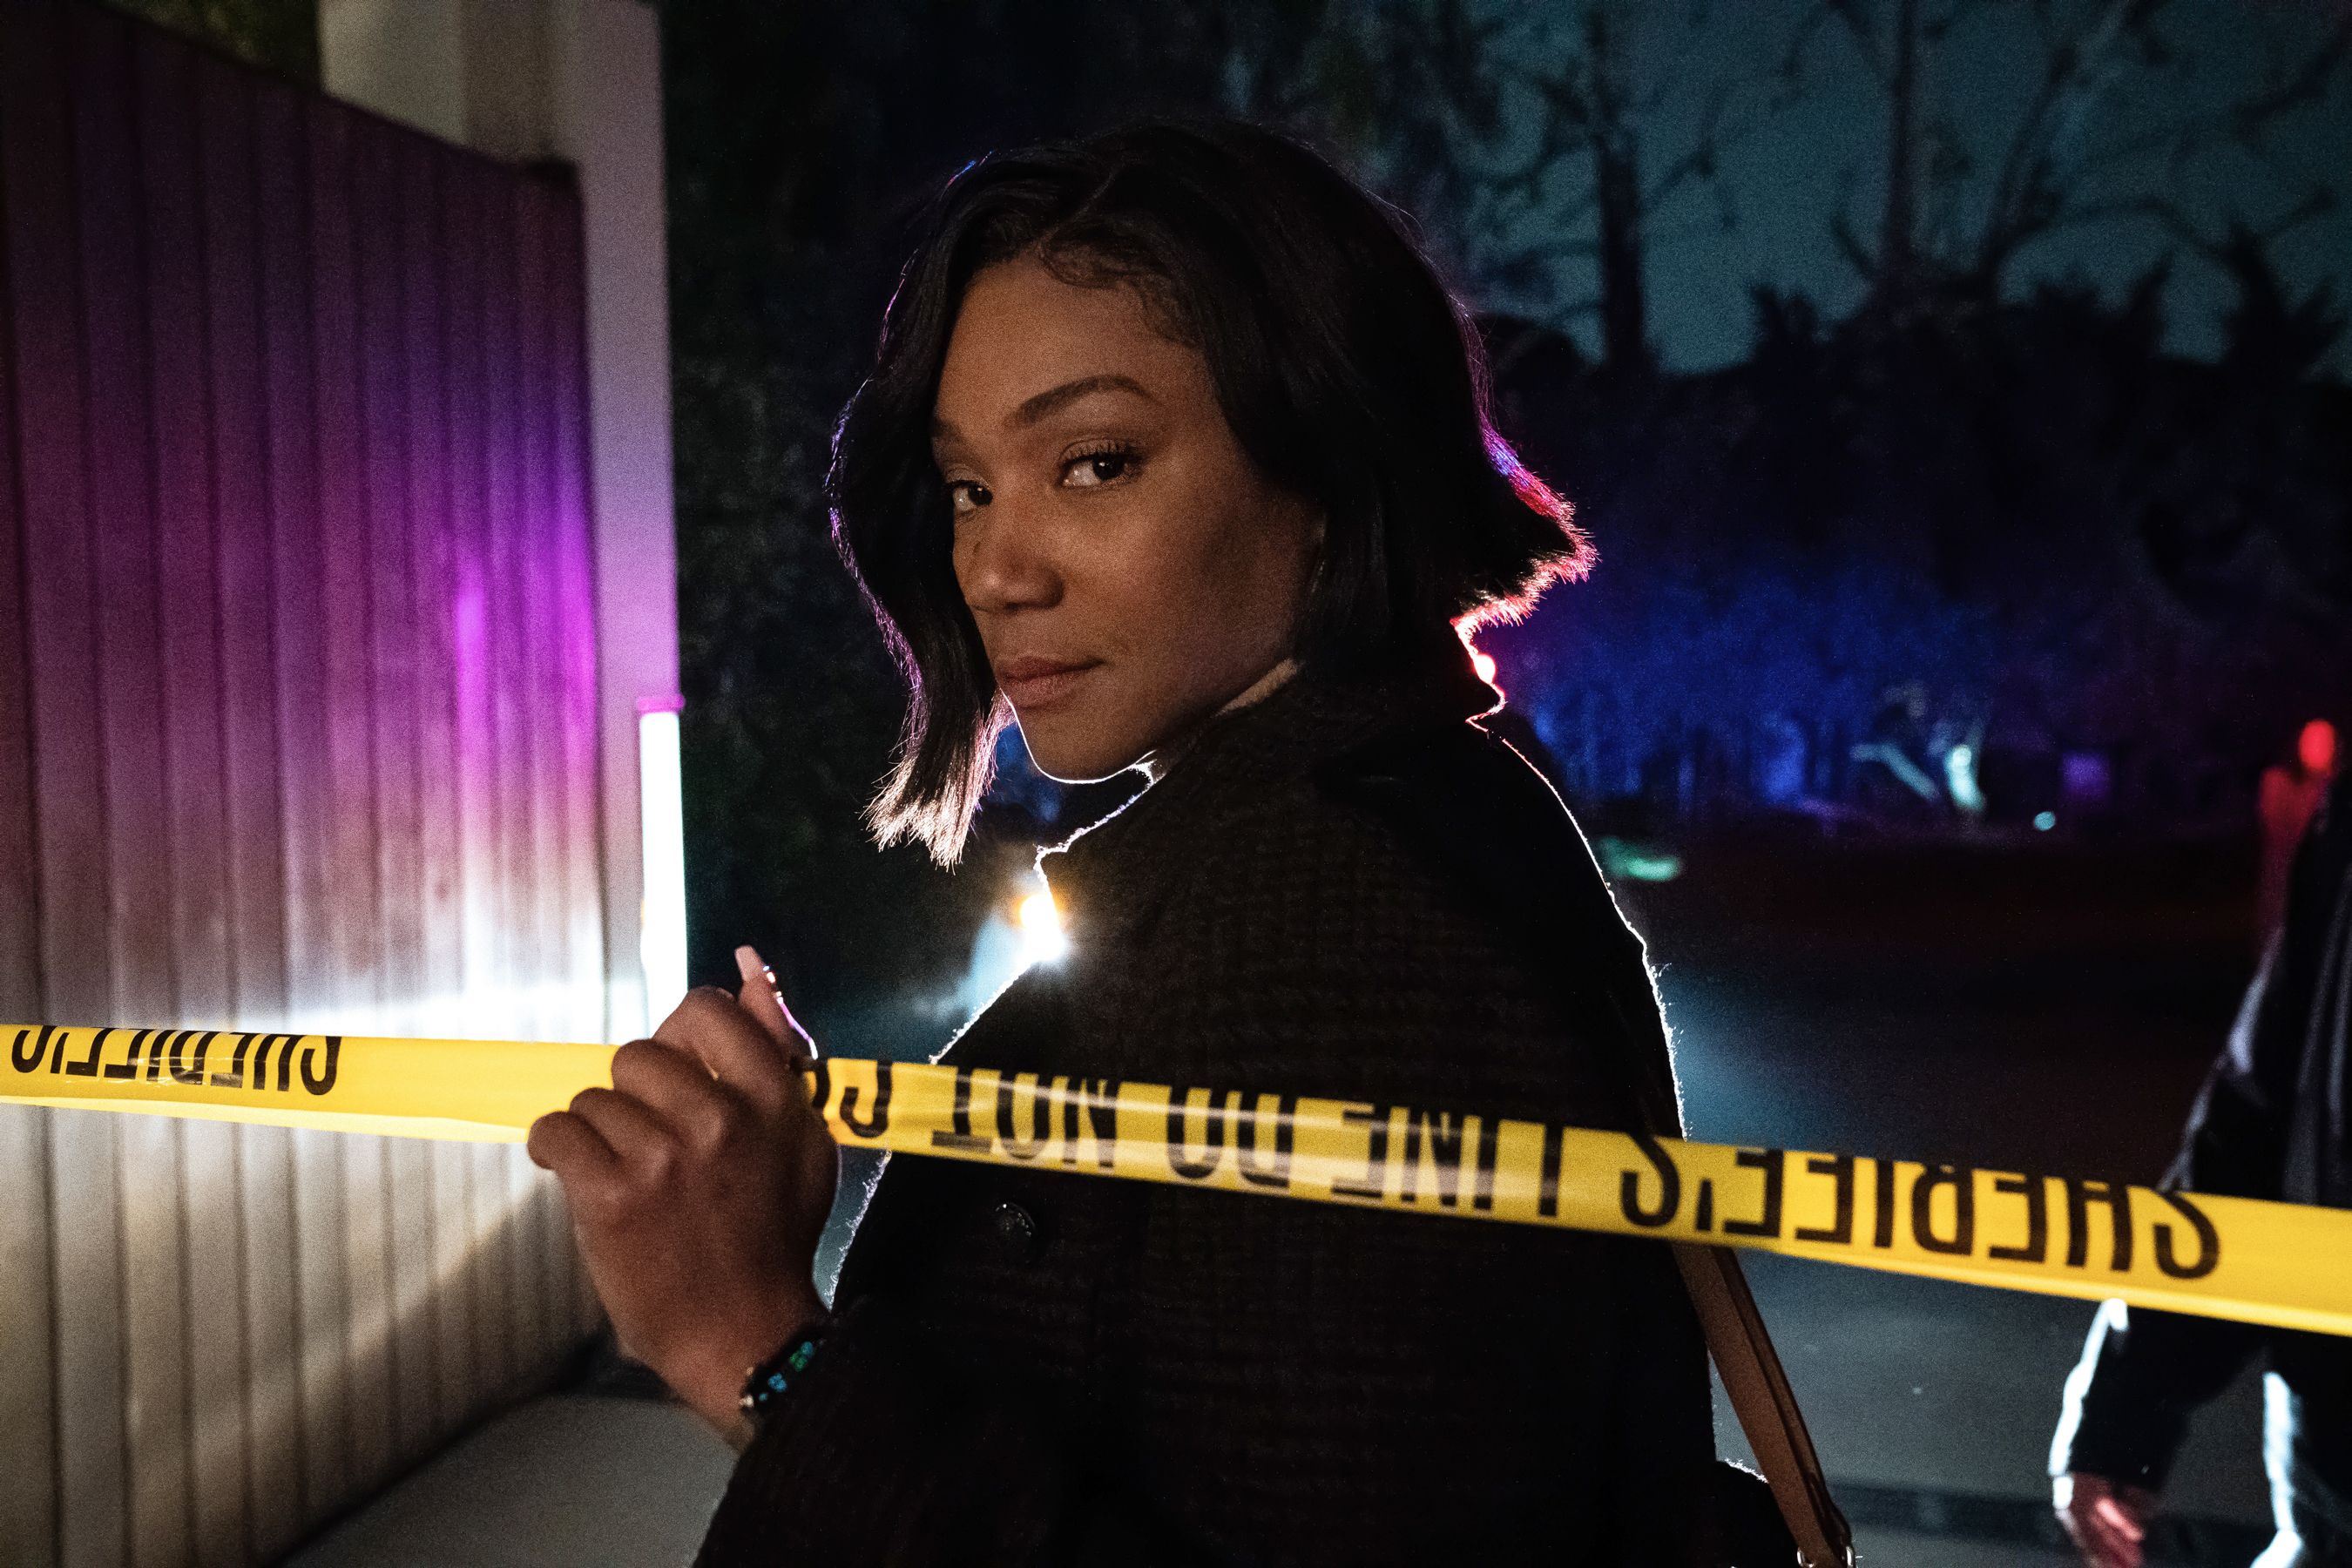 Apple TV+'s global hit murder mystery comedy “The Afterparty